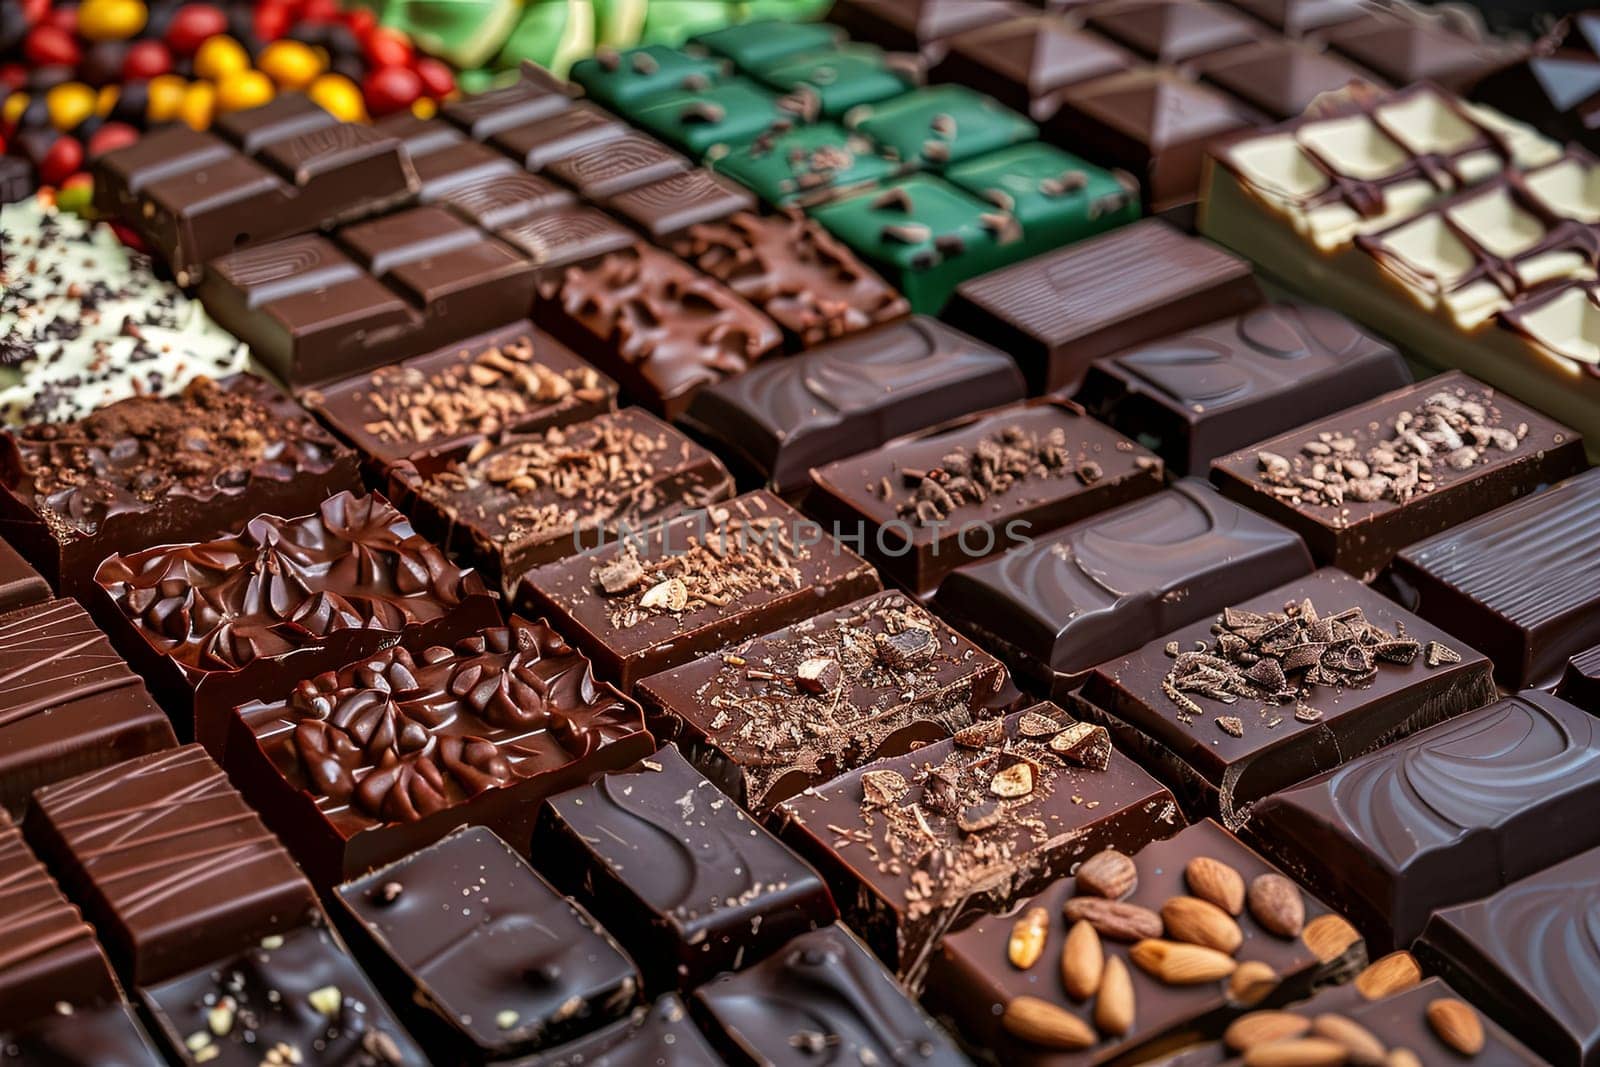 Close-up view of various chocolate bars of different flavors and types, showcasing rich colors and intricate details.